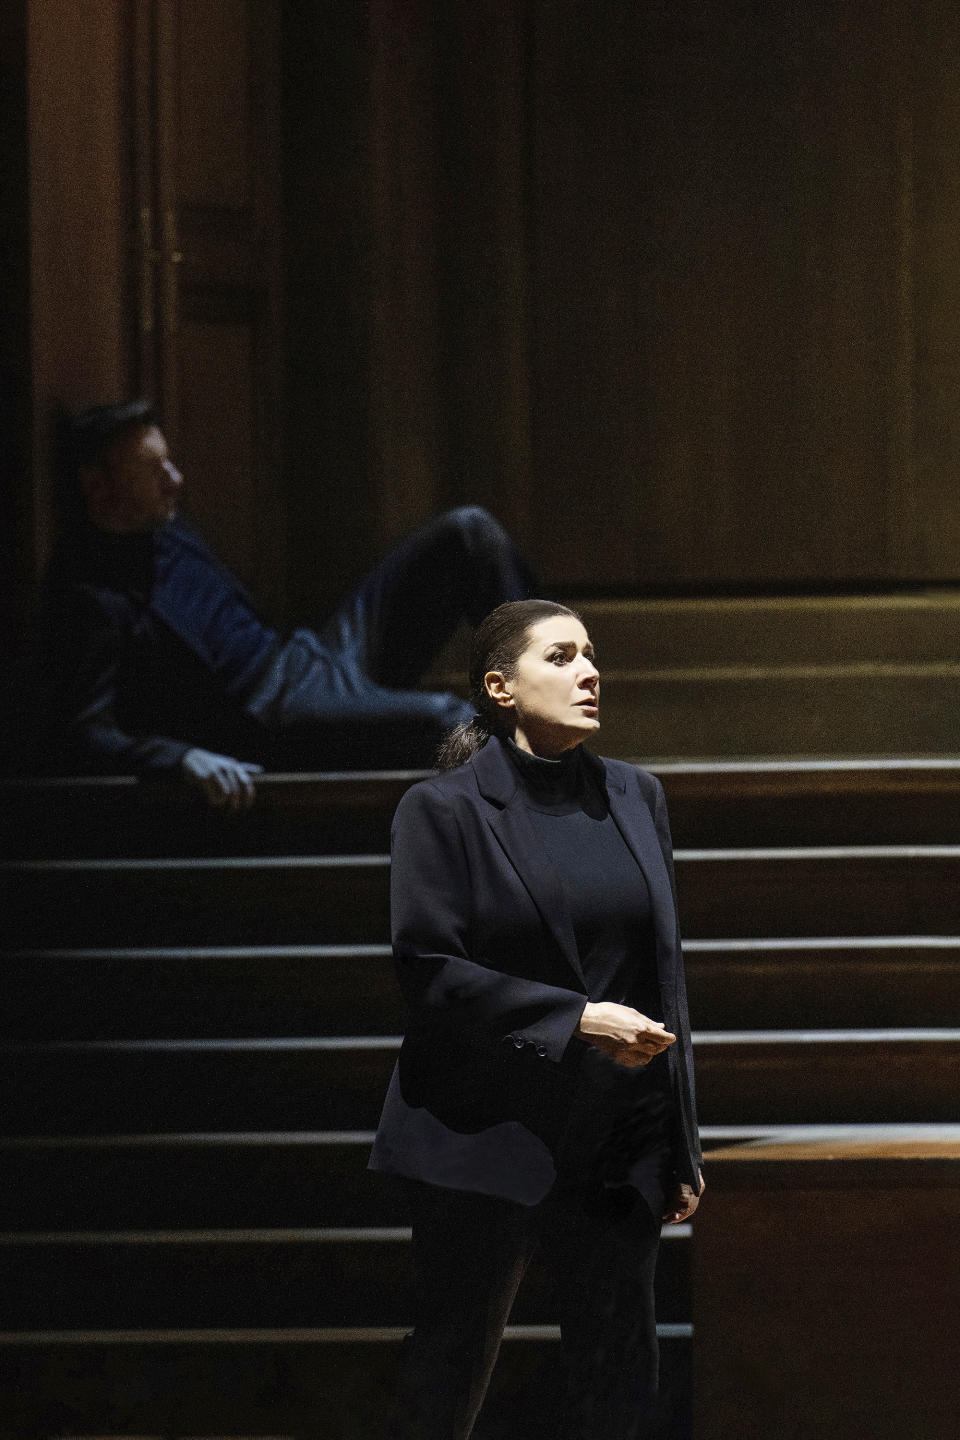 This image provided by the Salzburg Festival shows mezzo-soprano Cecilia Bartoli as Orfeo in a rehearsal of Christof Loy's production of Gluck's "Orfeo ed Eurydice" at the Salzburg Festival. (Monika Rittershaus/Salzburg Festival via AP)